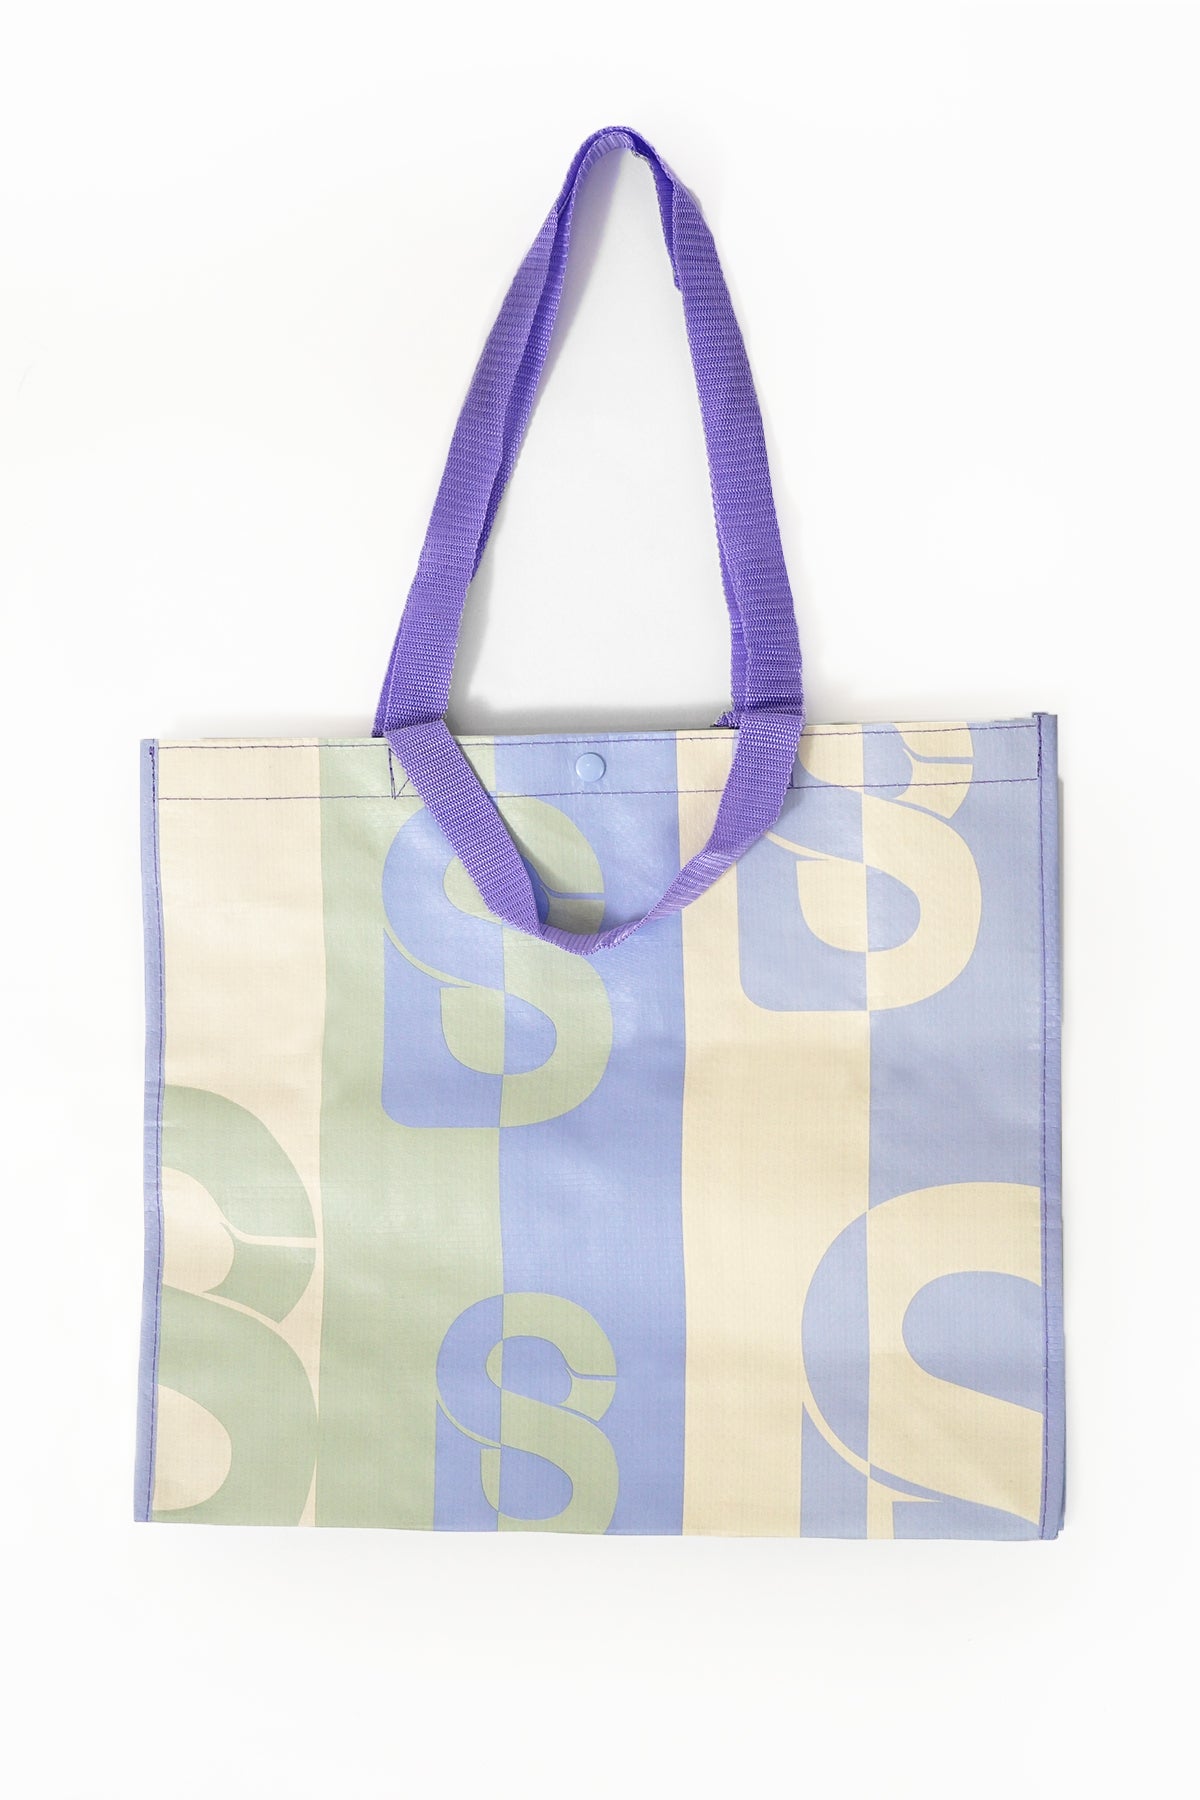 Everything Bag by Buttonscarves